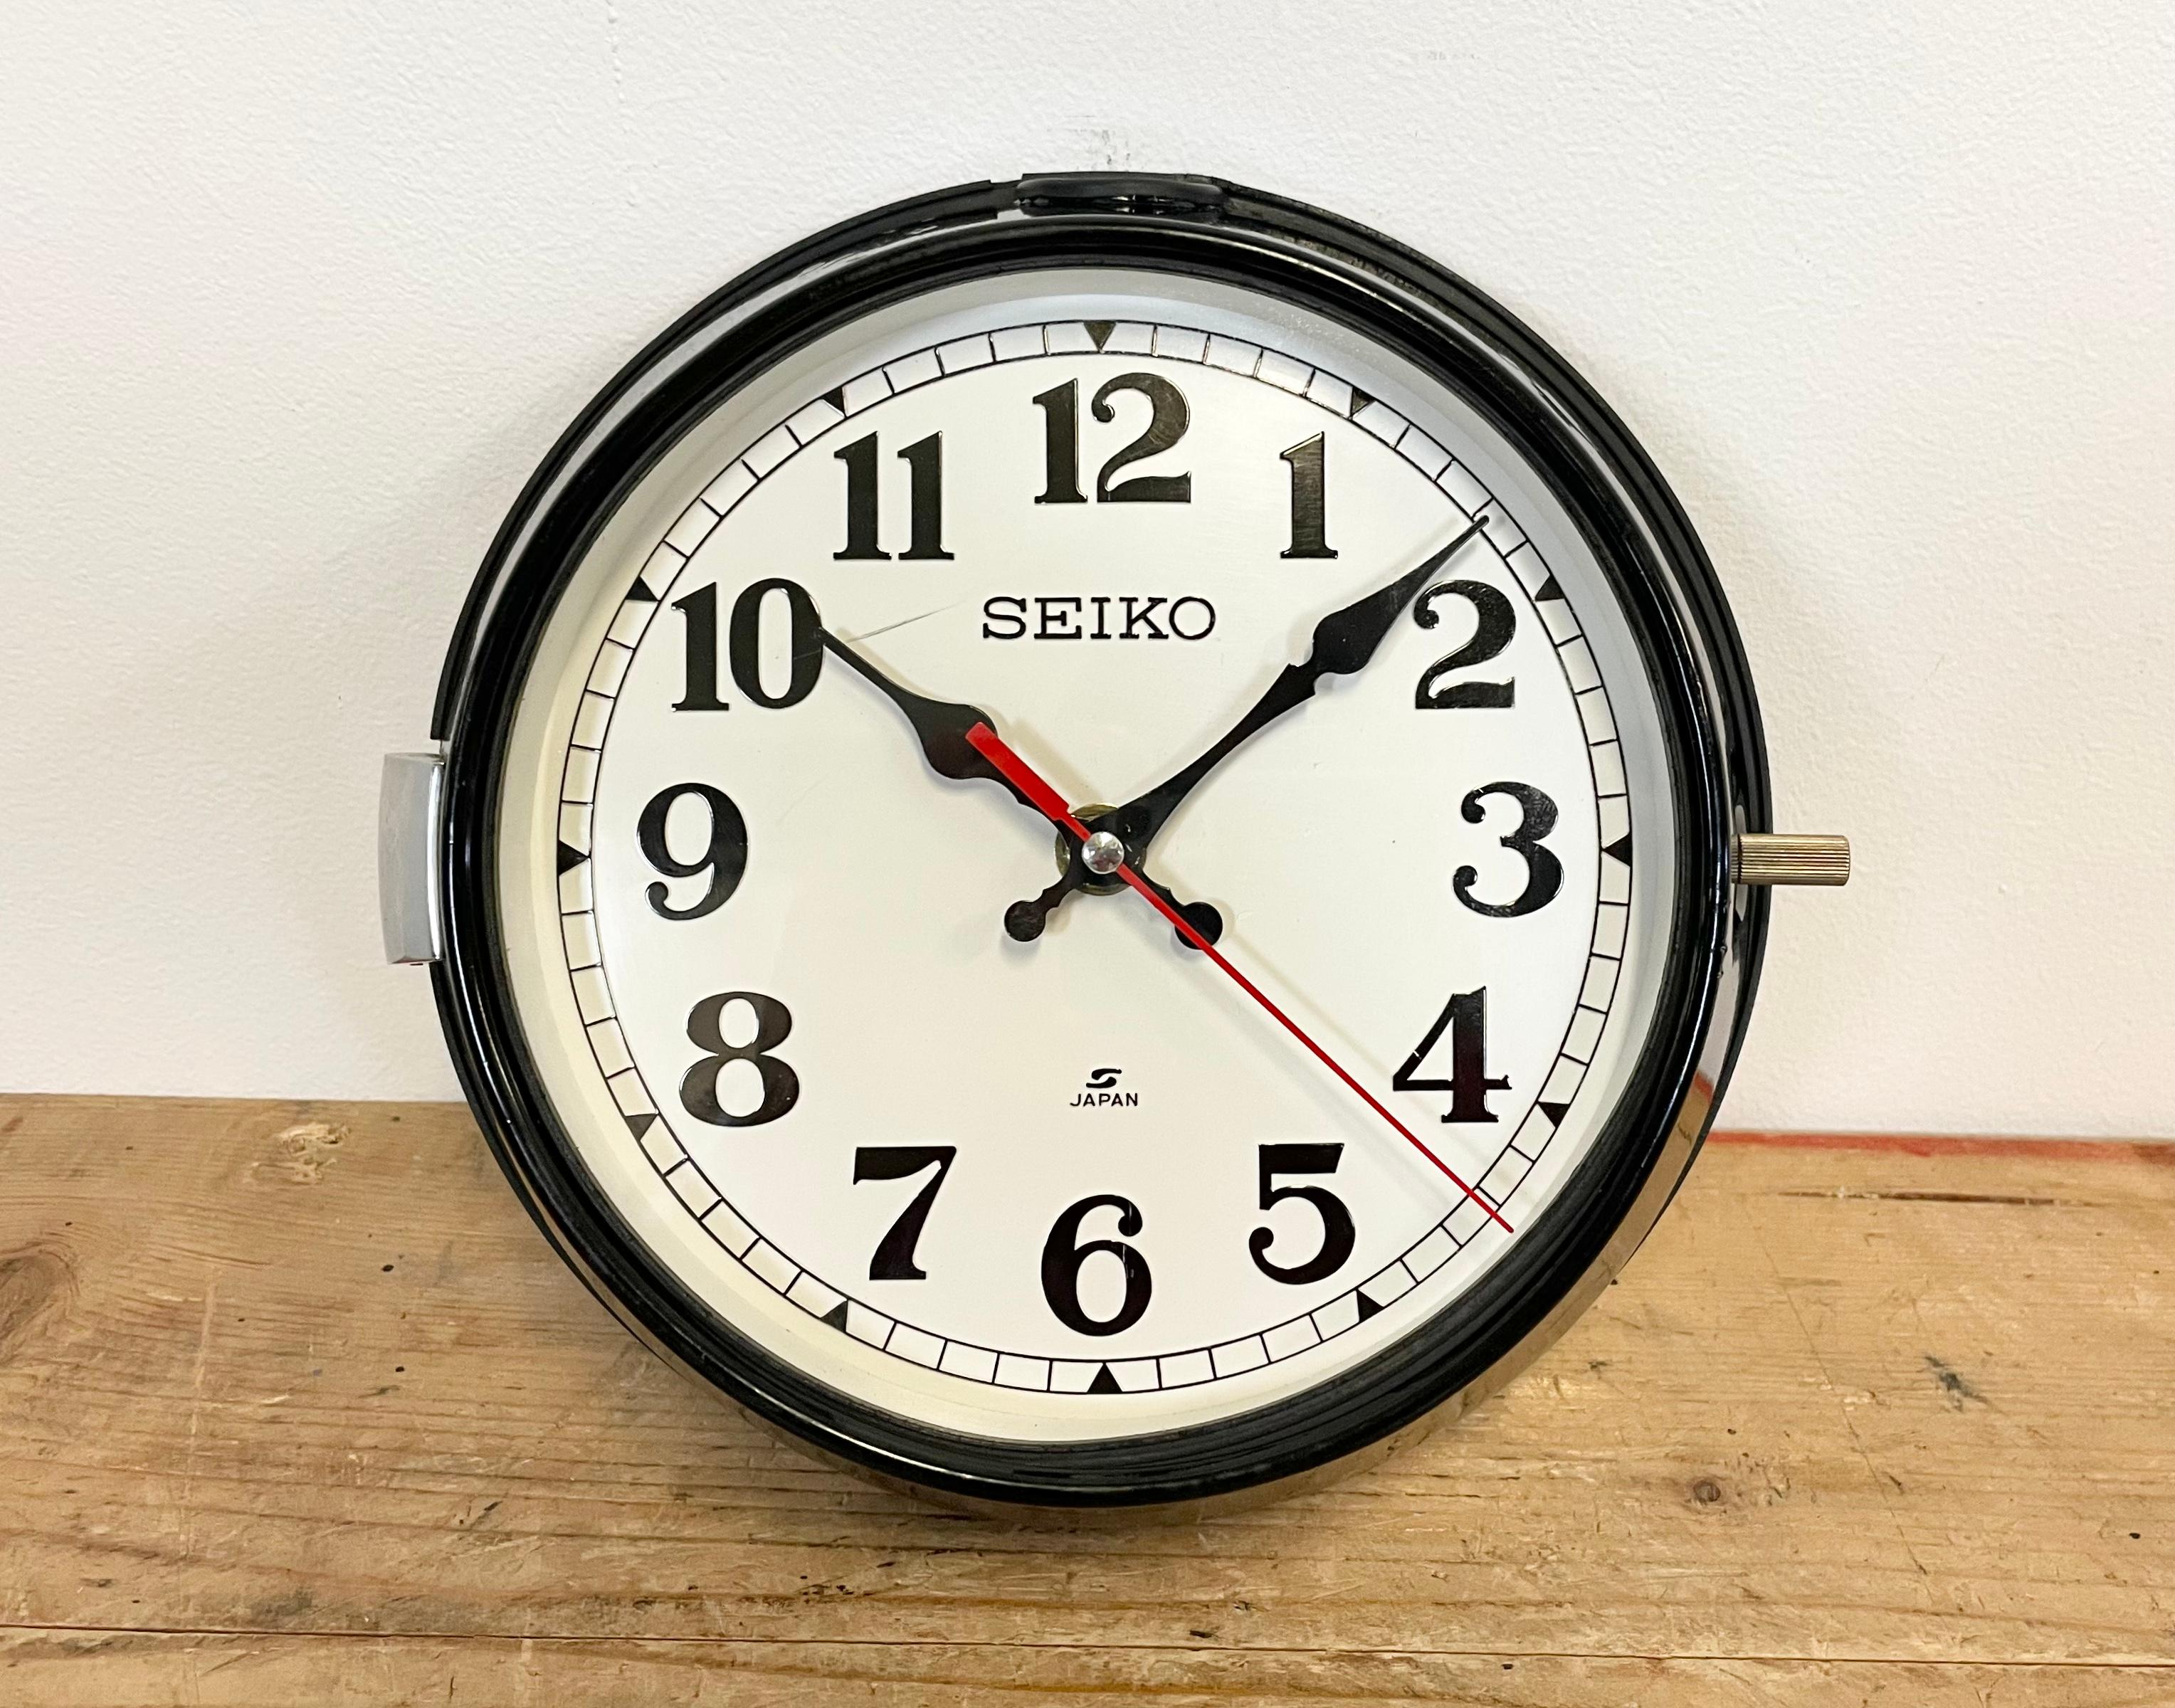 Vintage Seiko navy slave clock designed during the 1970s. These clocks were used on large Japanese cargo ships. It features a black metal frame, a white plastic dial and clear glass cover. This item has been converted into a battery-powered